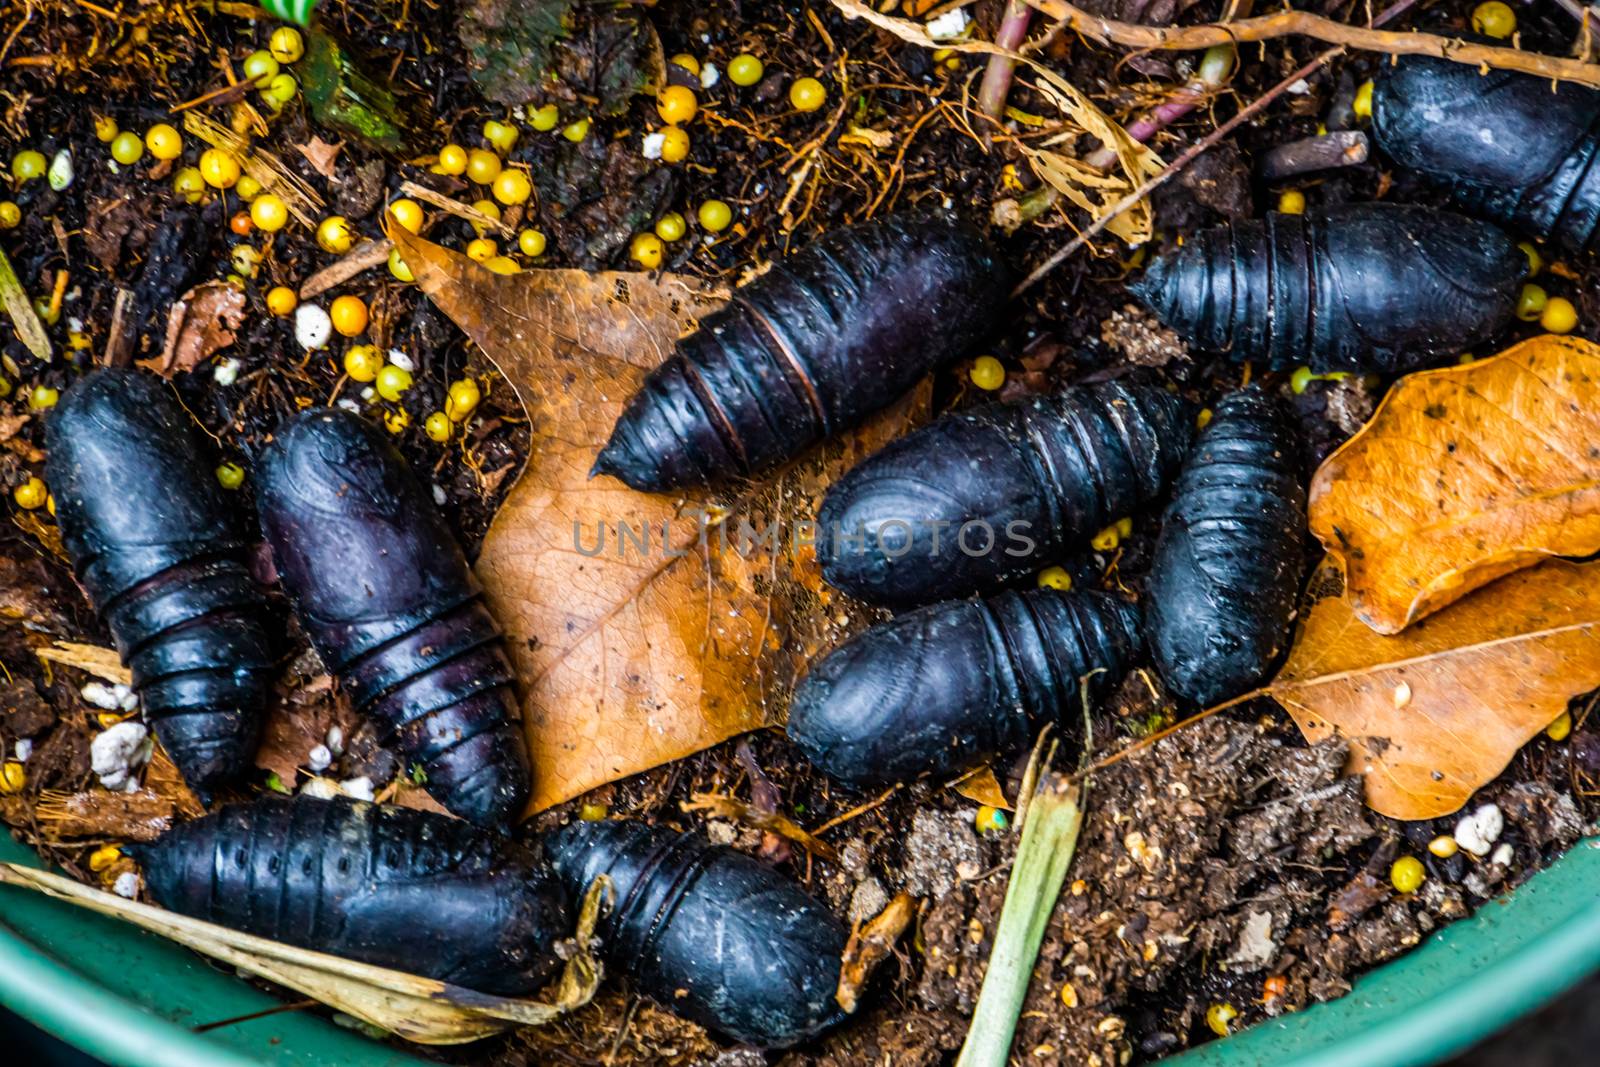 Black pupae laying in garden soil, common insect species by charlottebleijenberg